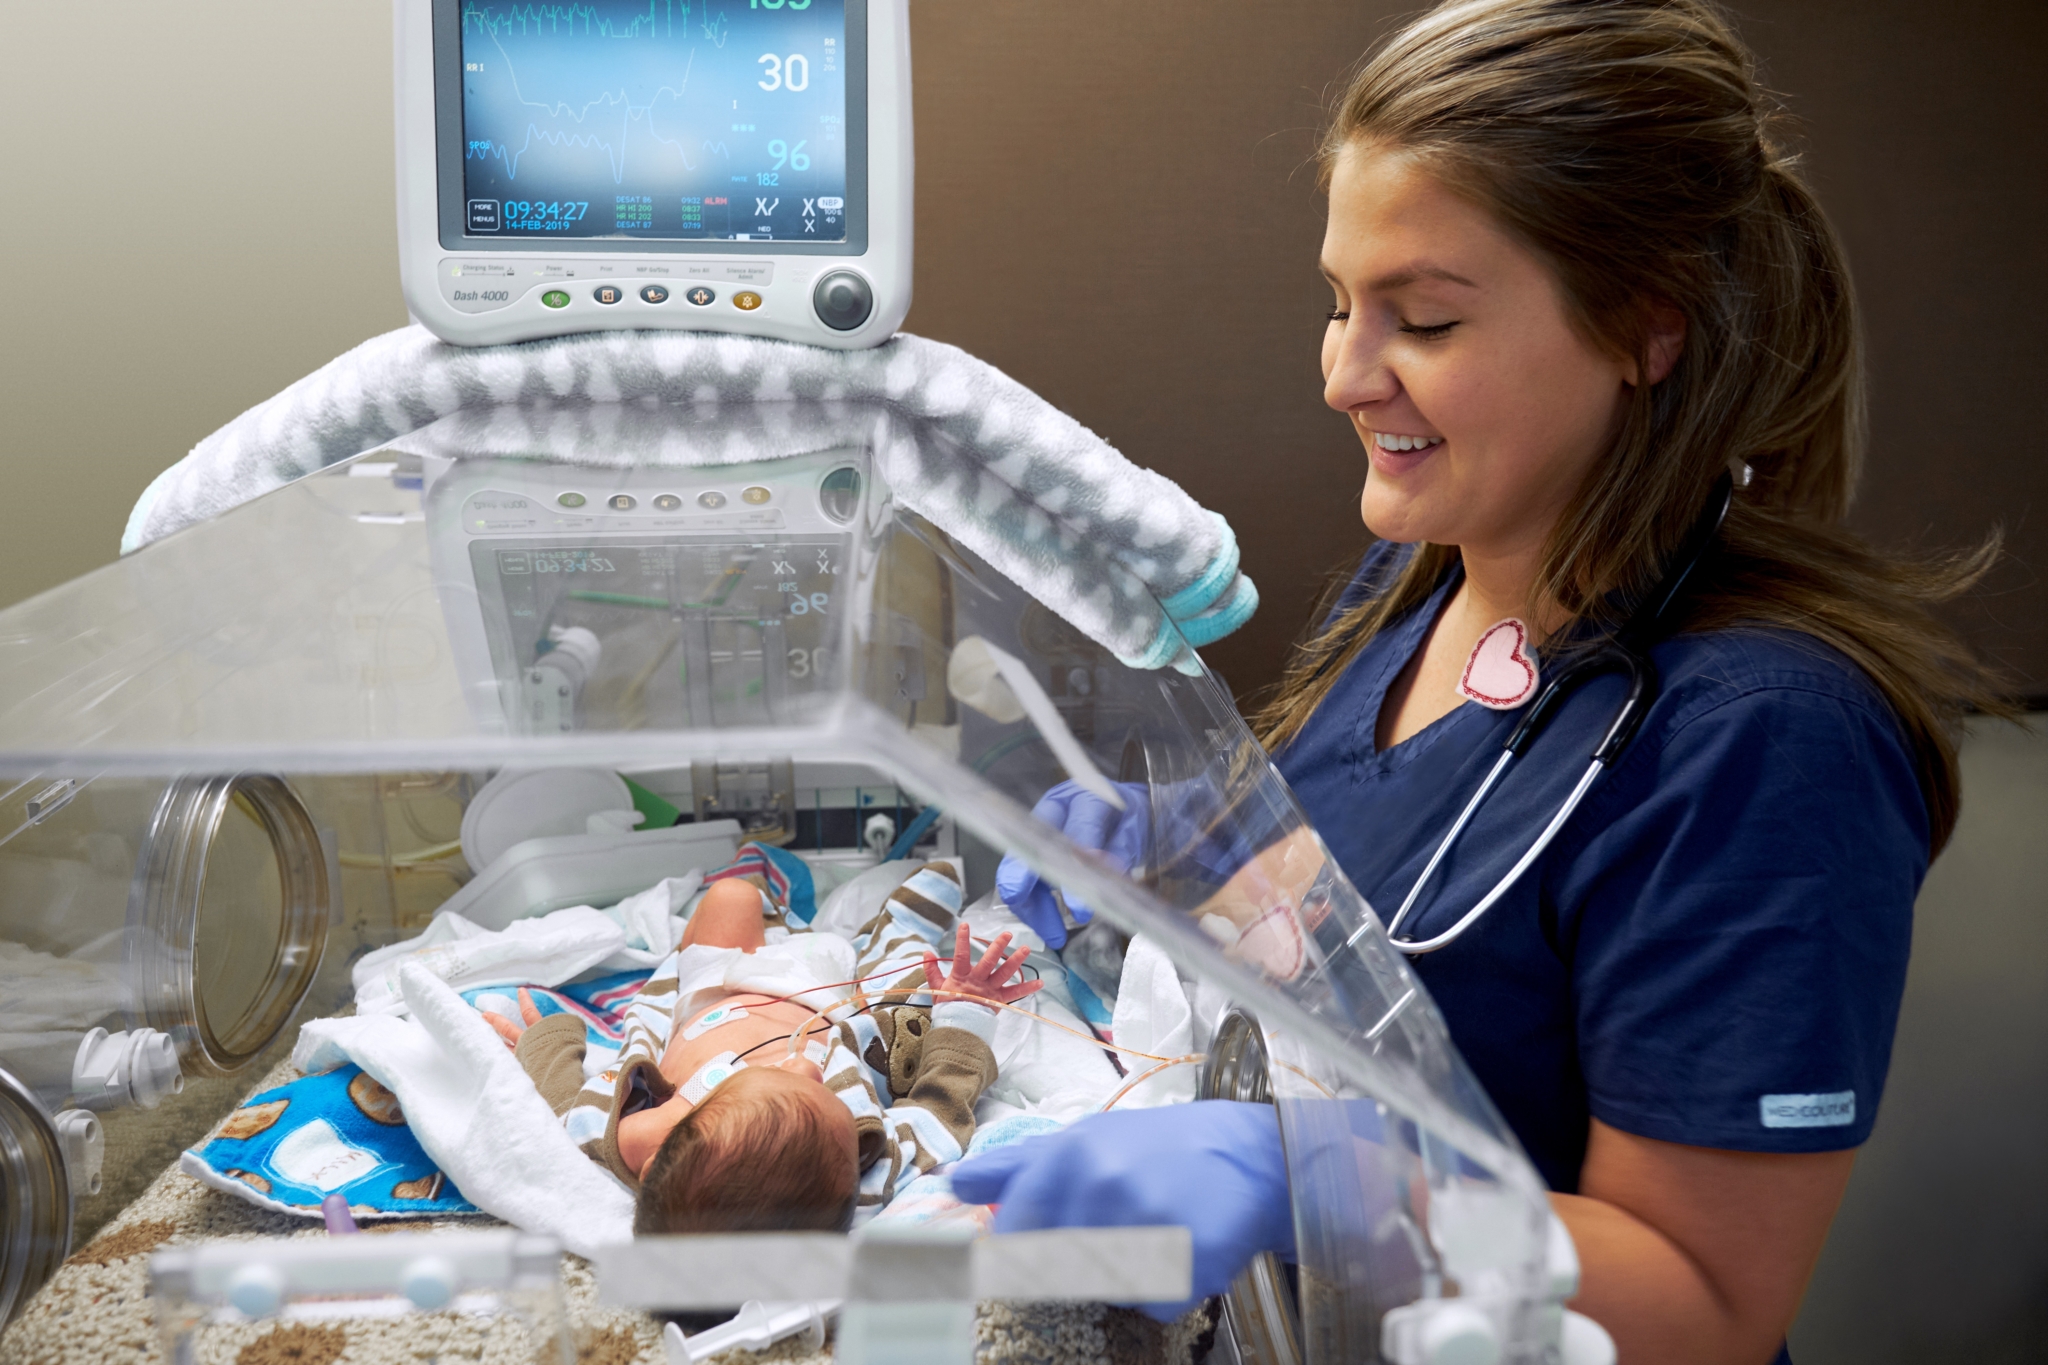 Brookwood cover NICU Read this Birmingham 6th grader's heart-warming "ode to essential workers"